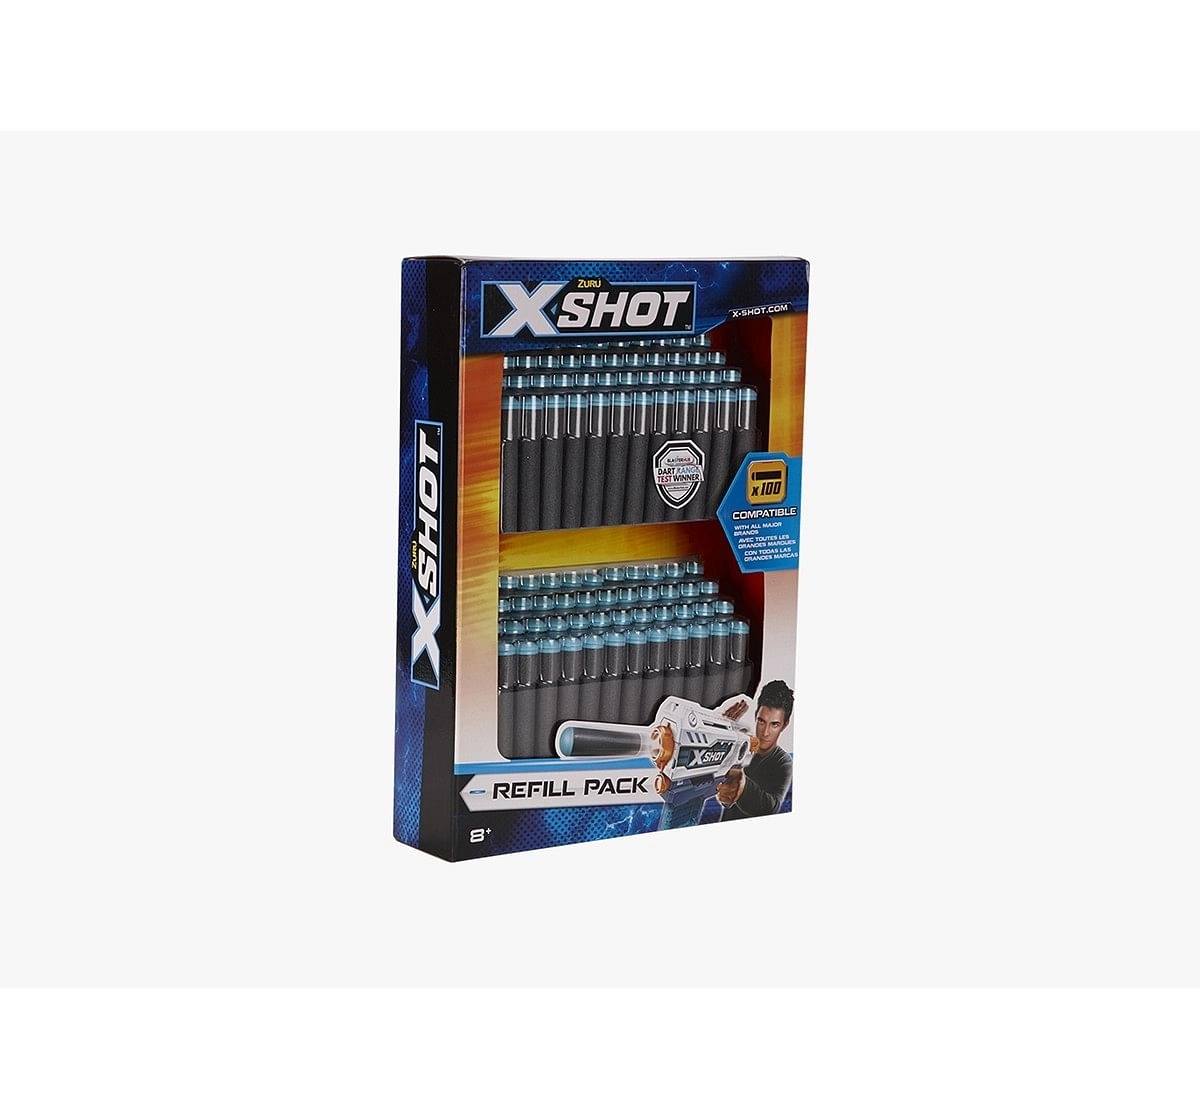 X-Shot 100 Darts Refill Pack Target Games  for Kids age 8Y+ (Grey)